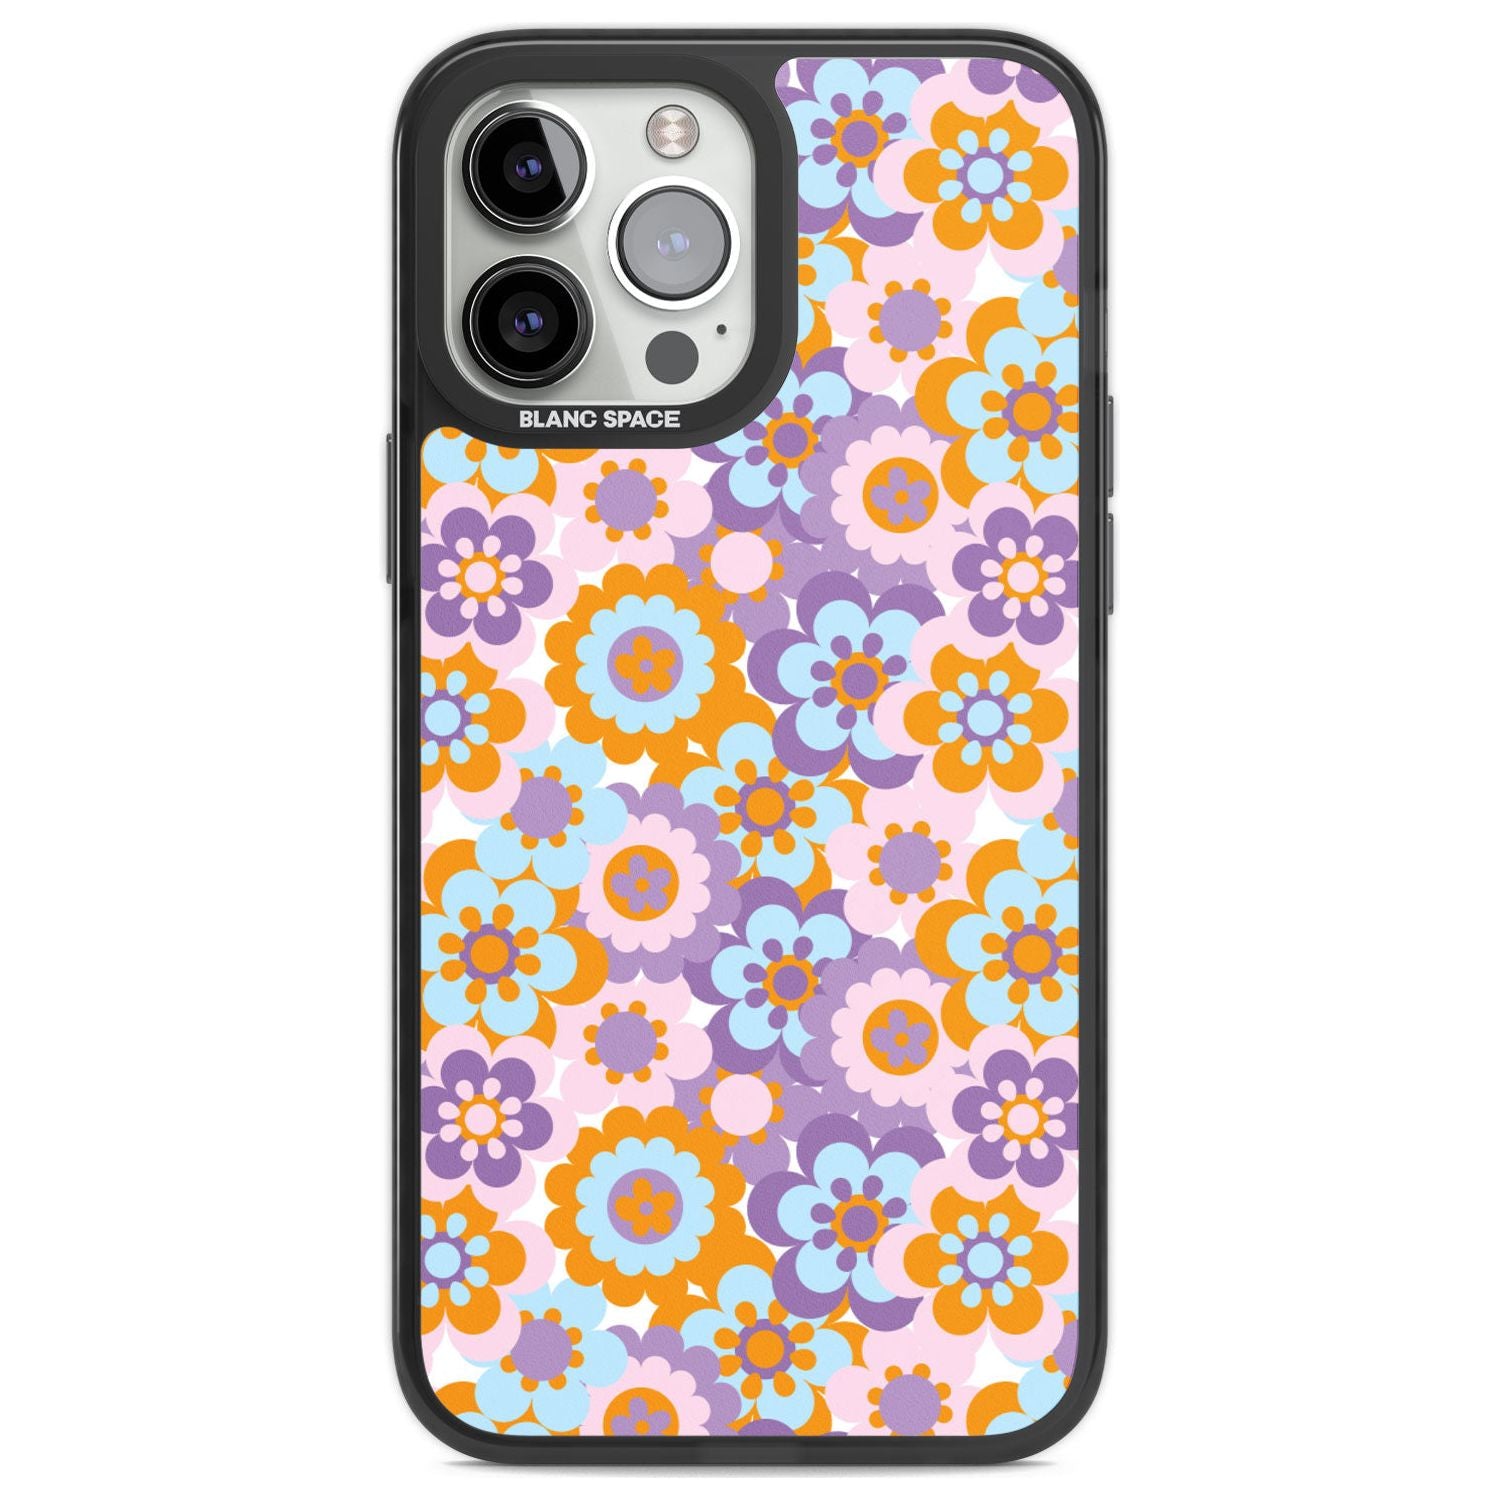 Flower Power Pattern Phone Case iPhone 13 Pro Max / Black Impact Case,iPhone 14 Pro Max / Black Impact Case Blanc Space